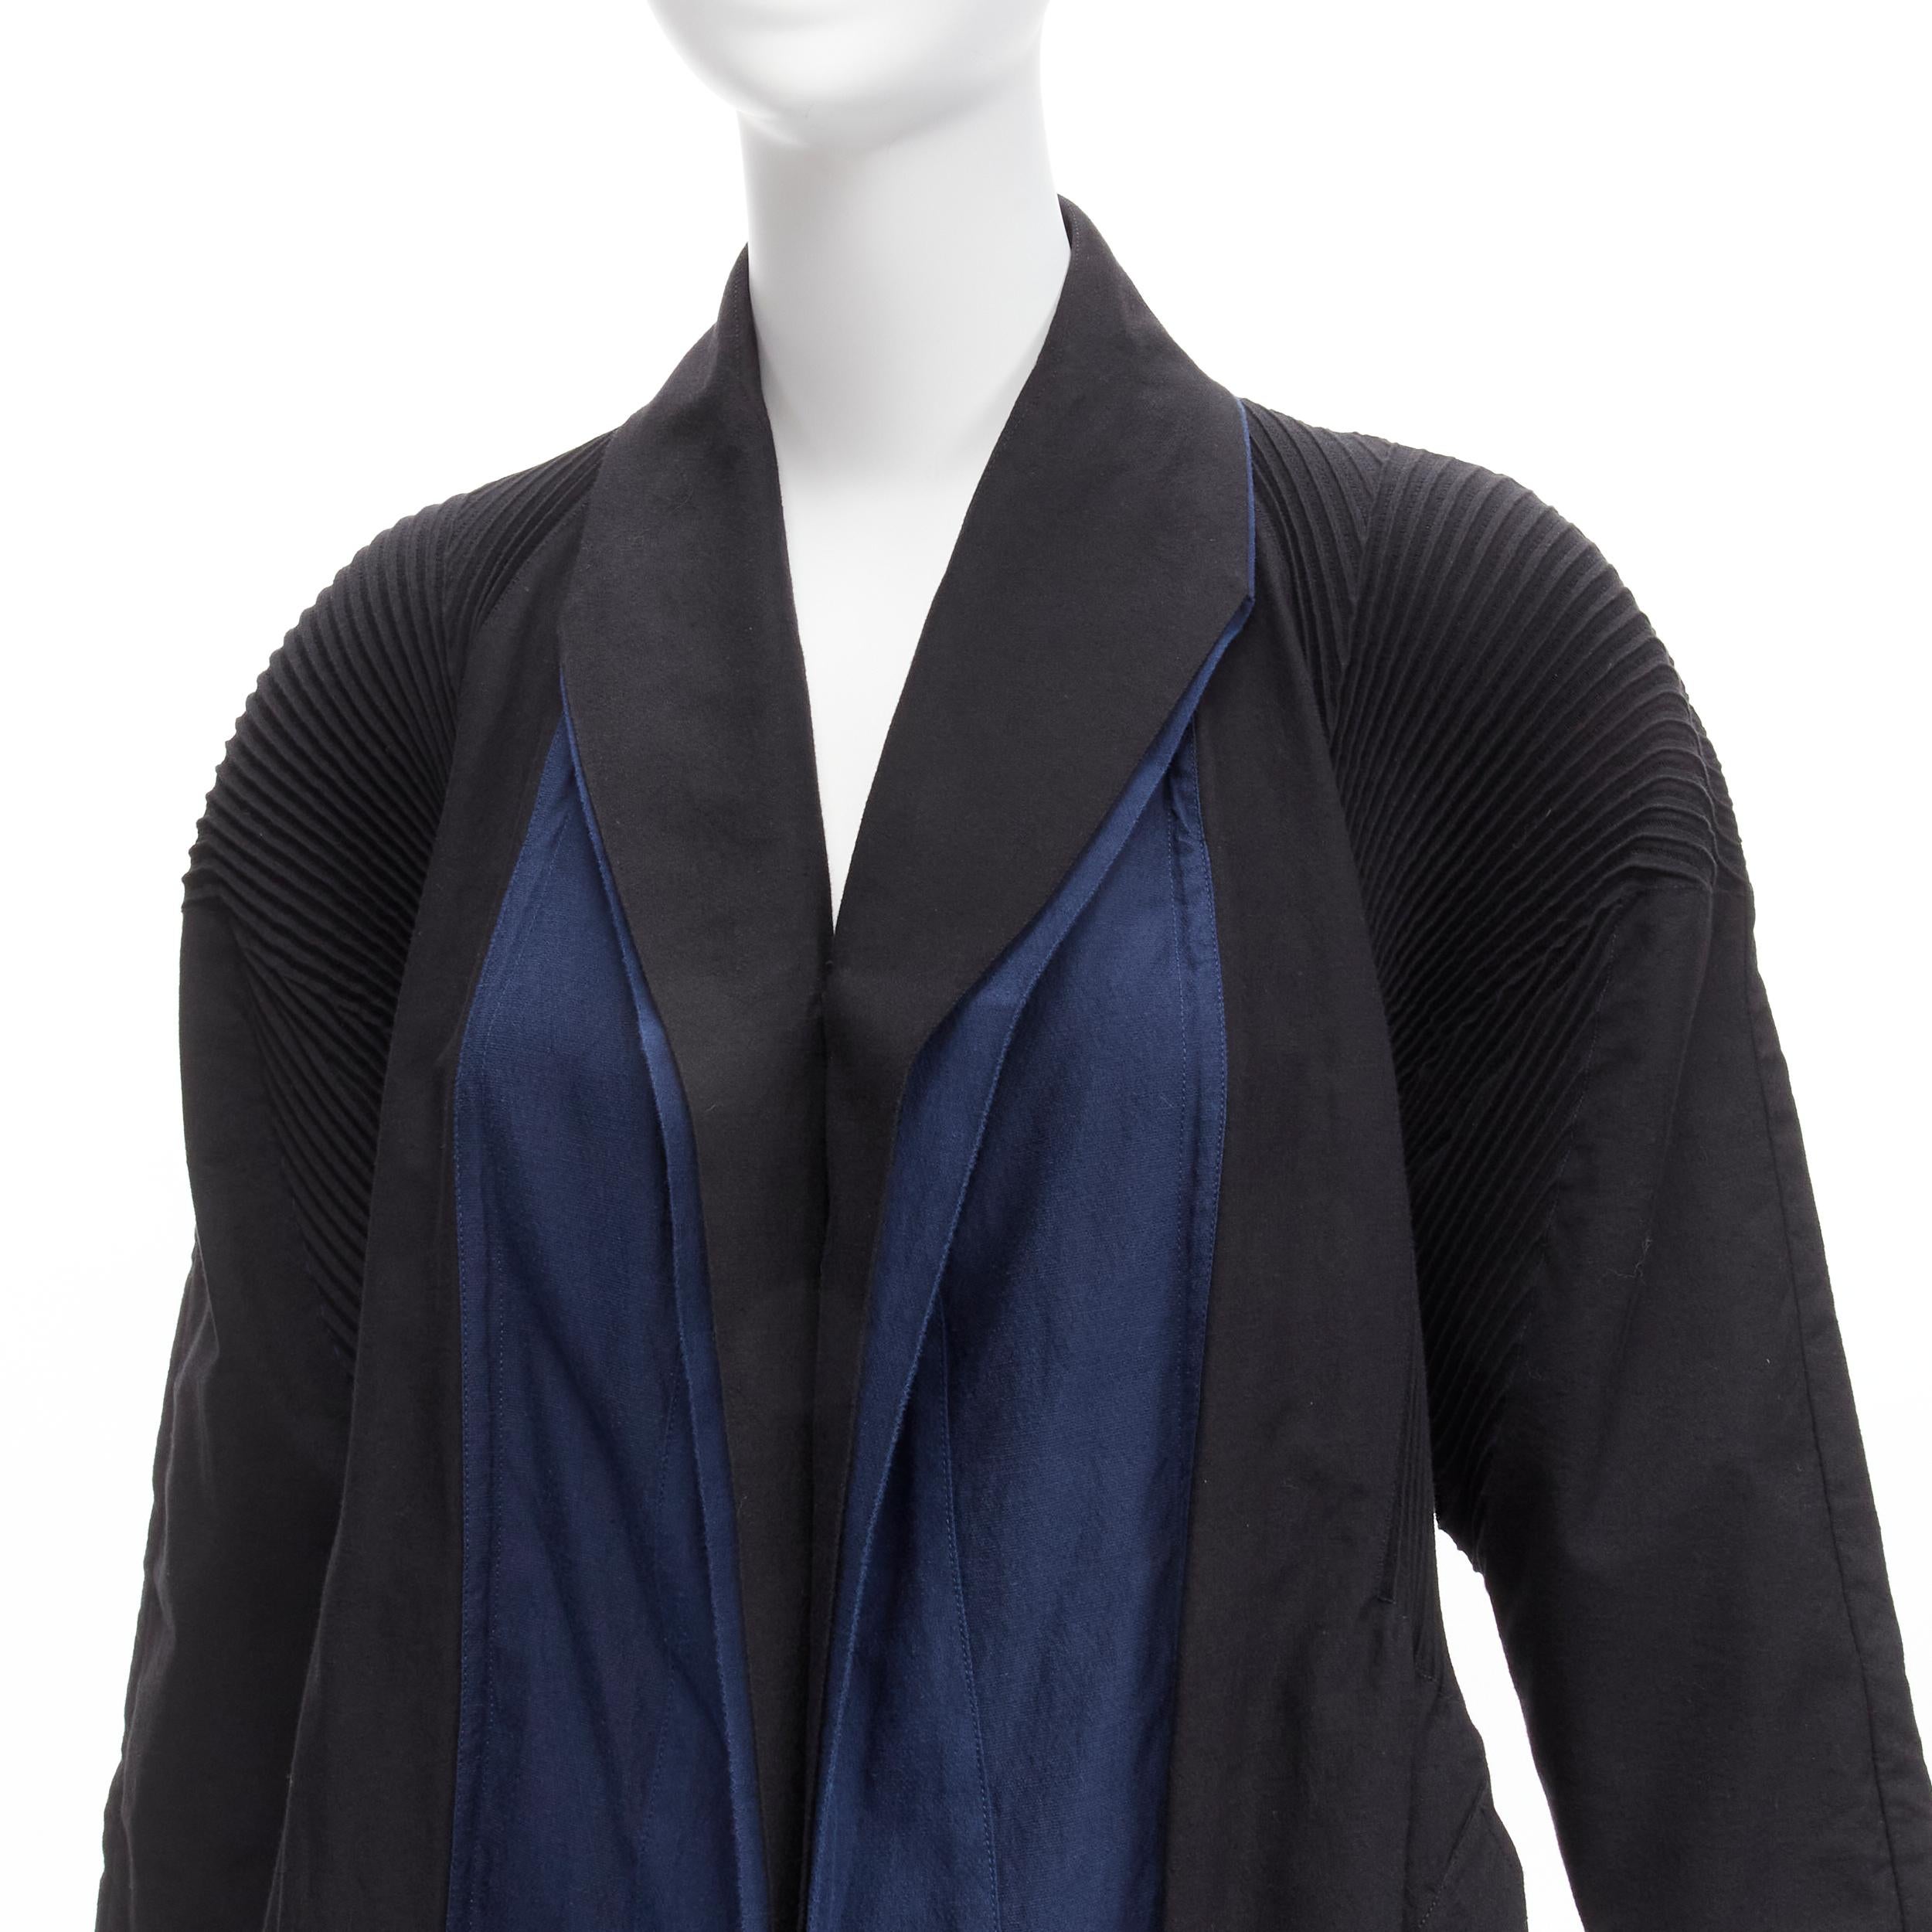 ISSEY MIYAKE black blue cotton blend pleated shoulder 3D cut coat JP2 M
Reference: TGAS/D00255
Brand: Issey Miyake
Material: Cotton, Blend
Color: Black, Blue
Pattern: Solid
Closure: Button
Lining: Blue Fabric
Extra Details: Hidden buttons for